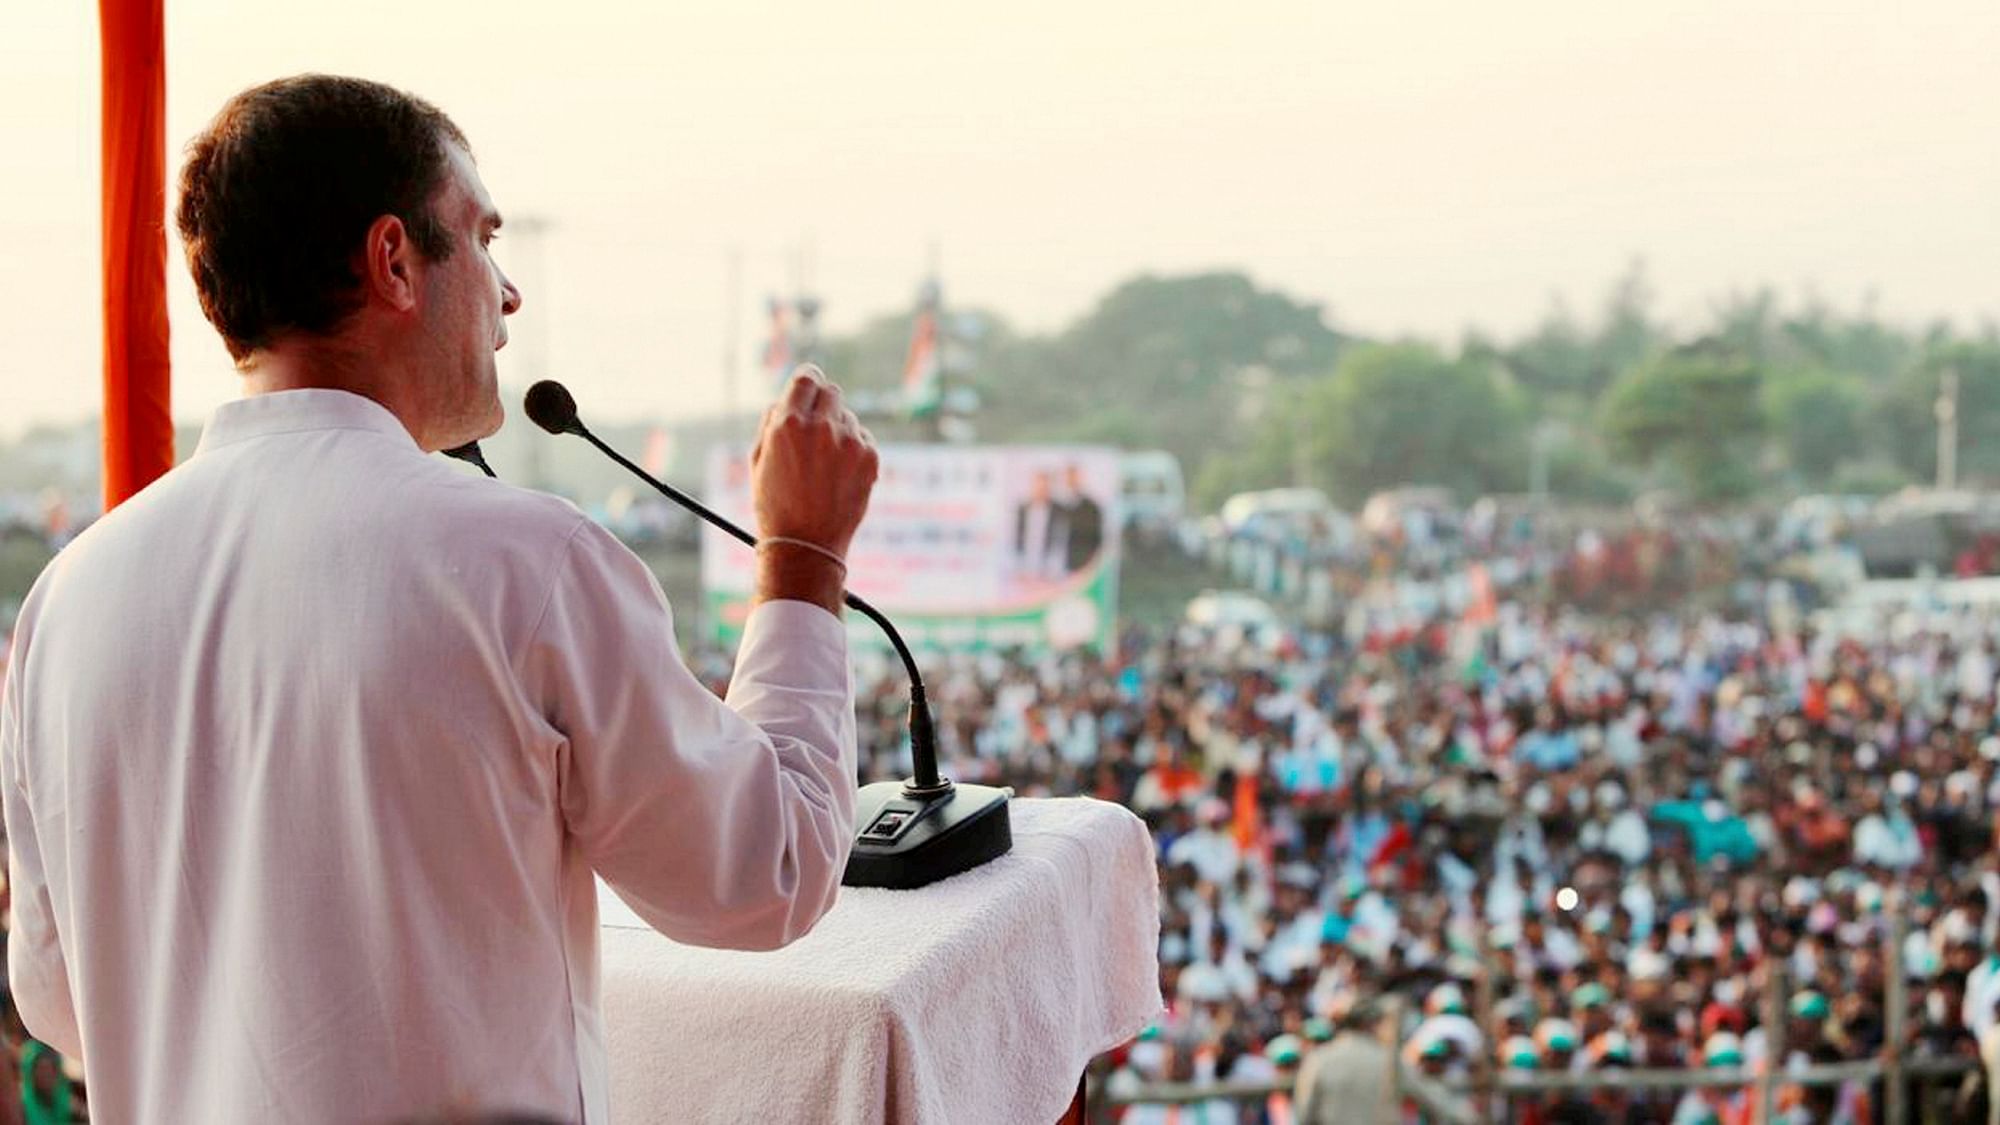 Congress leader Rahul Gandhi on Wednesday, 28 October, slammed the BJP-JD(U) government, saying that the existing government has “destroyed” Bihar and took jibes at Prime Minister Modi saying that he cannot compete with him at lying.